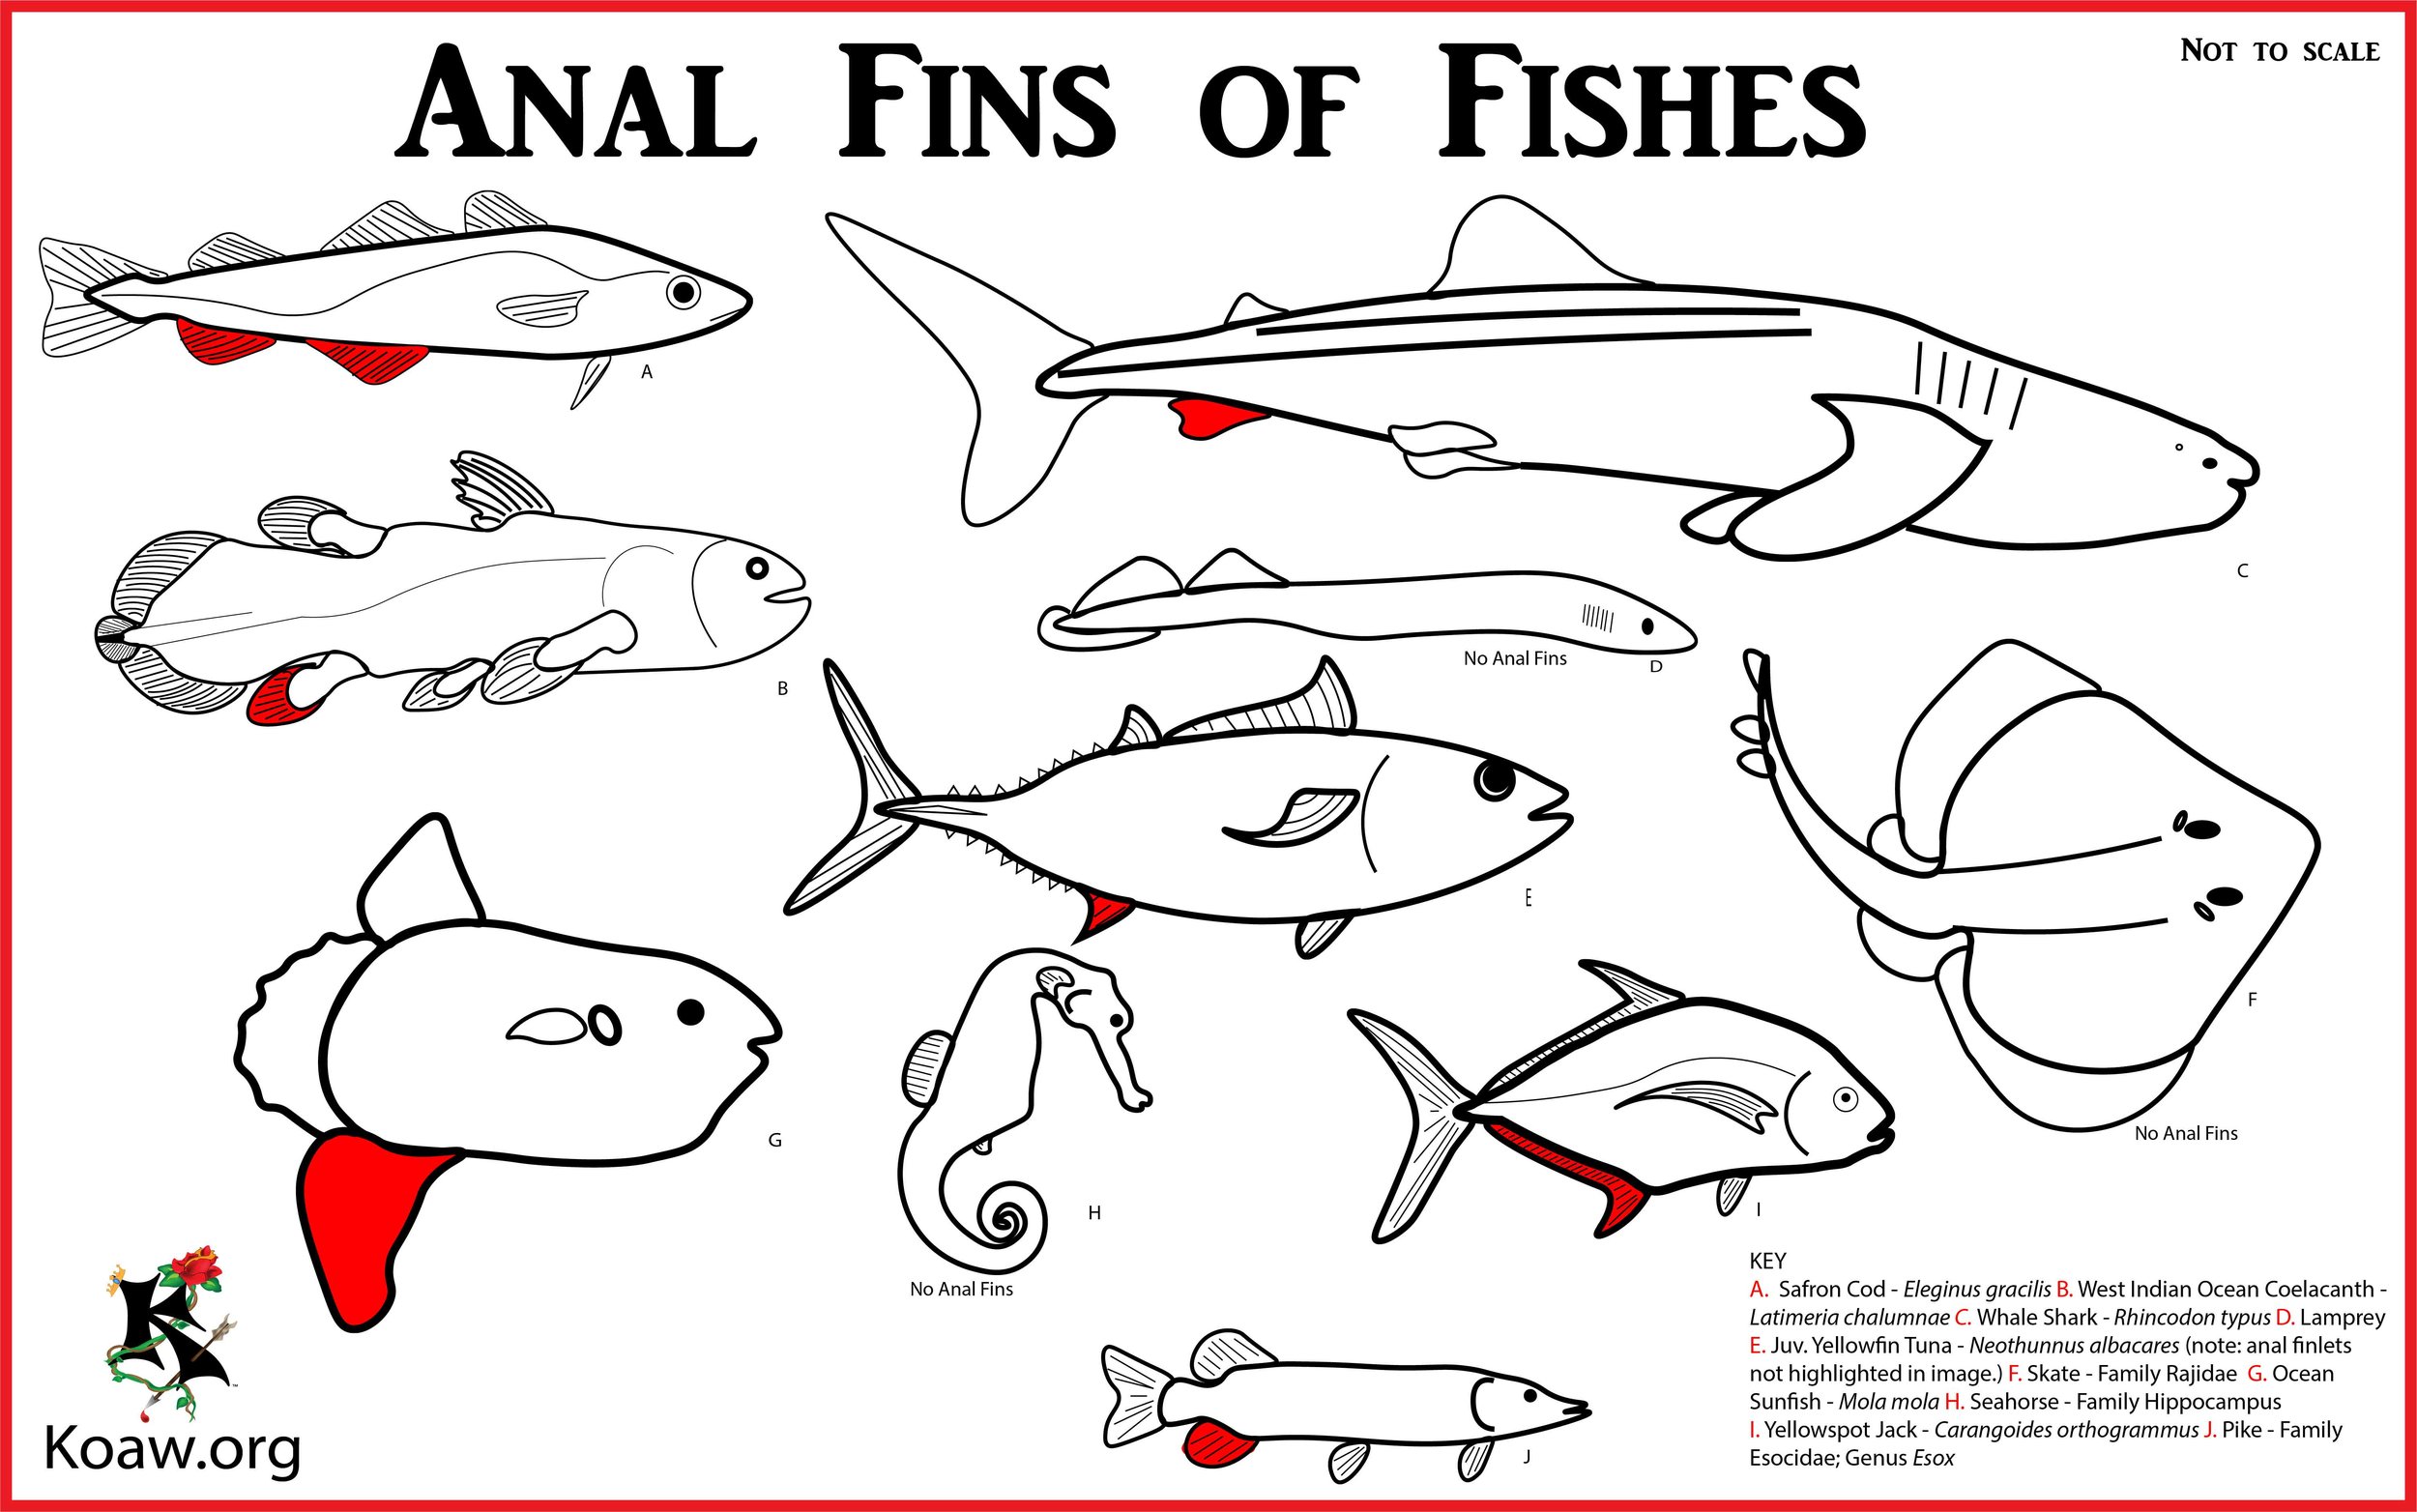 Anal Fins of Fishes - Illustration by Koaw